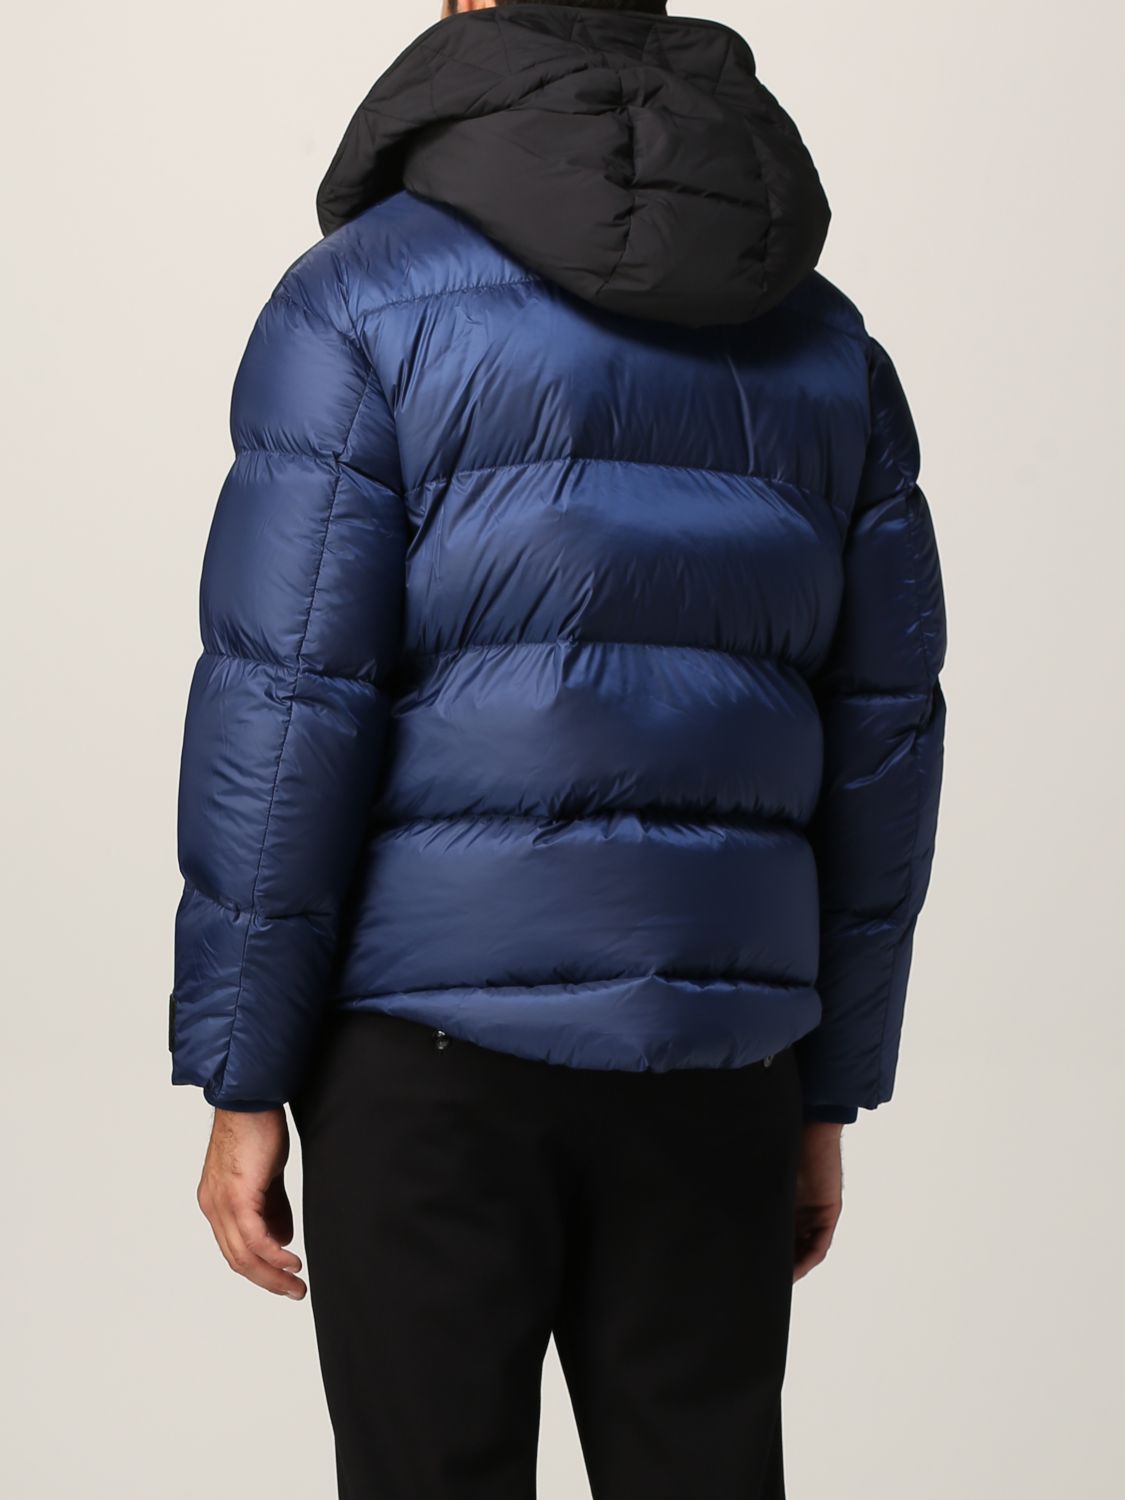 Tot jacht Dader EMPORIO ARMANI: down jacket in quilted fabric - Blue | Emporio Armani jacket  6K1BA5 1NQGZ online on GIGLIO.COM